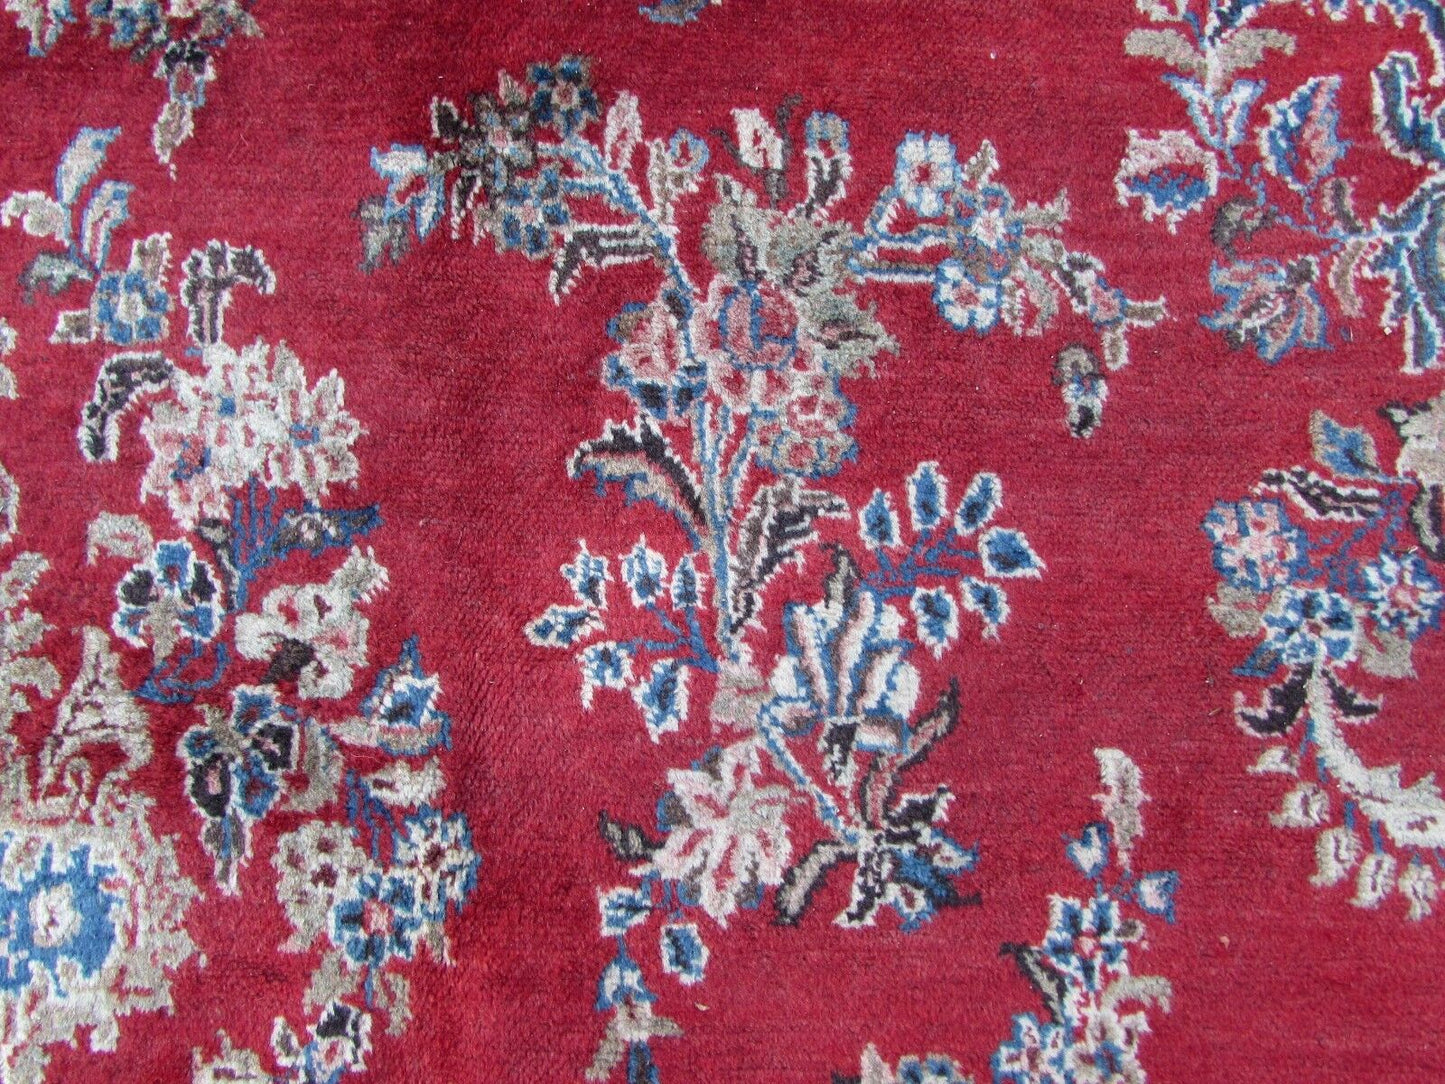 Handmade vintage Persian Kerman rug in bright red and sky blue color. The rug is from the end of 20th century in original condition, it has some low pile.